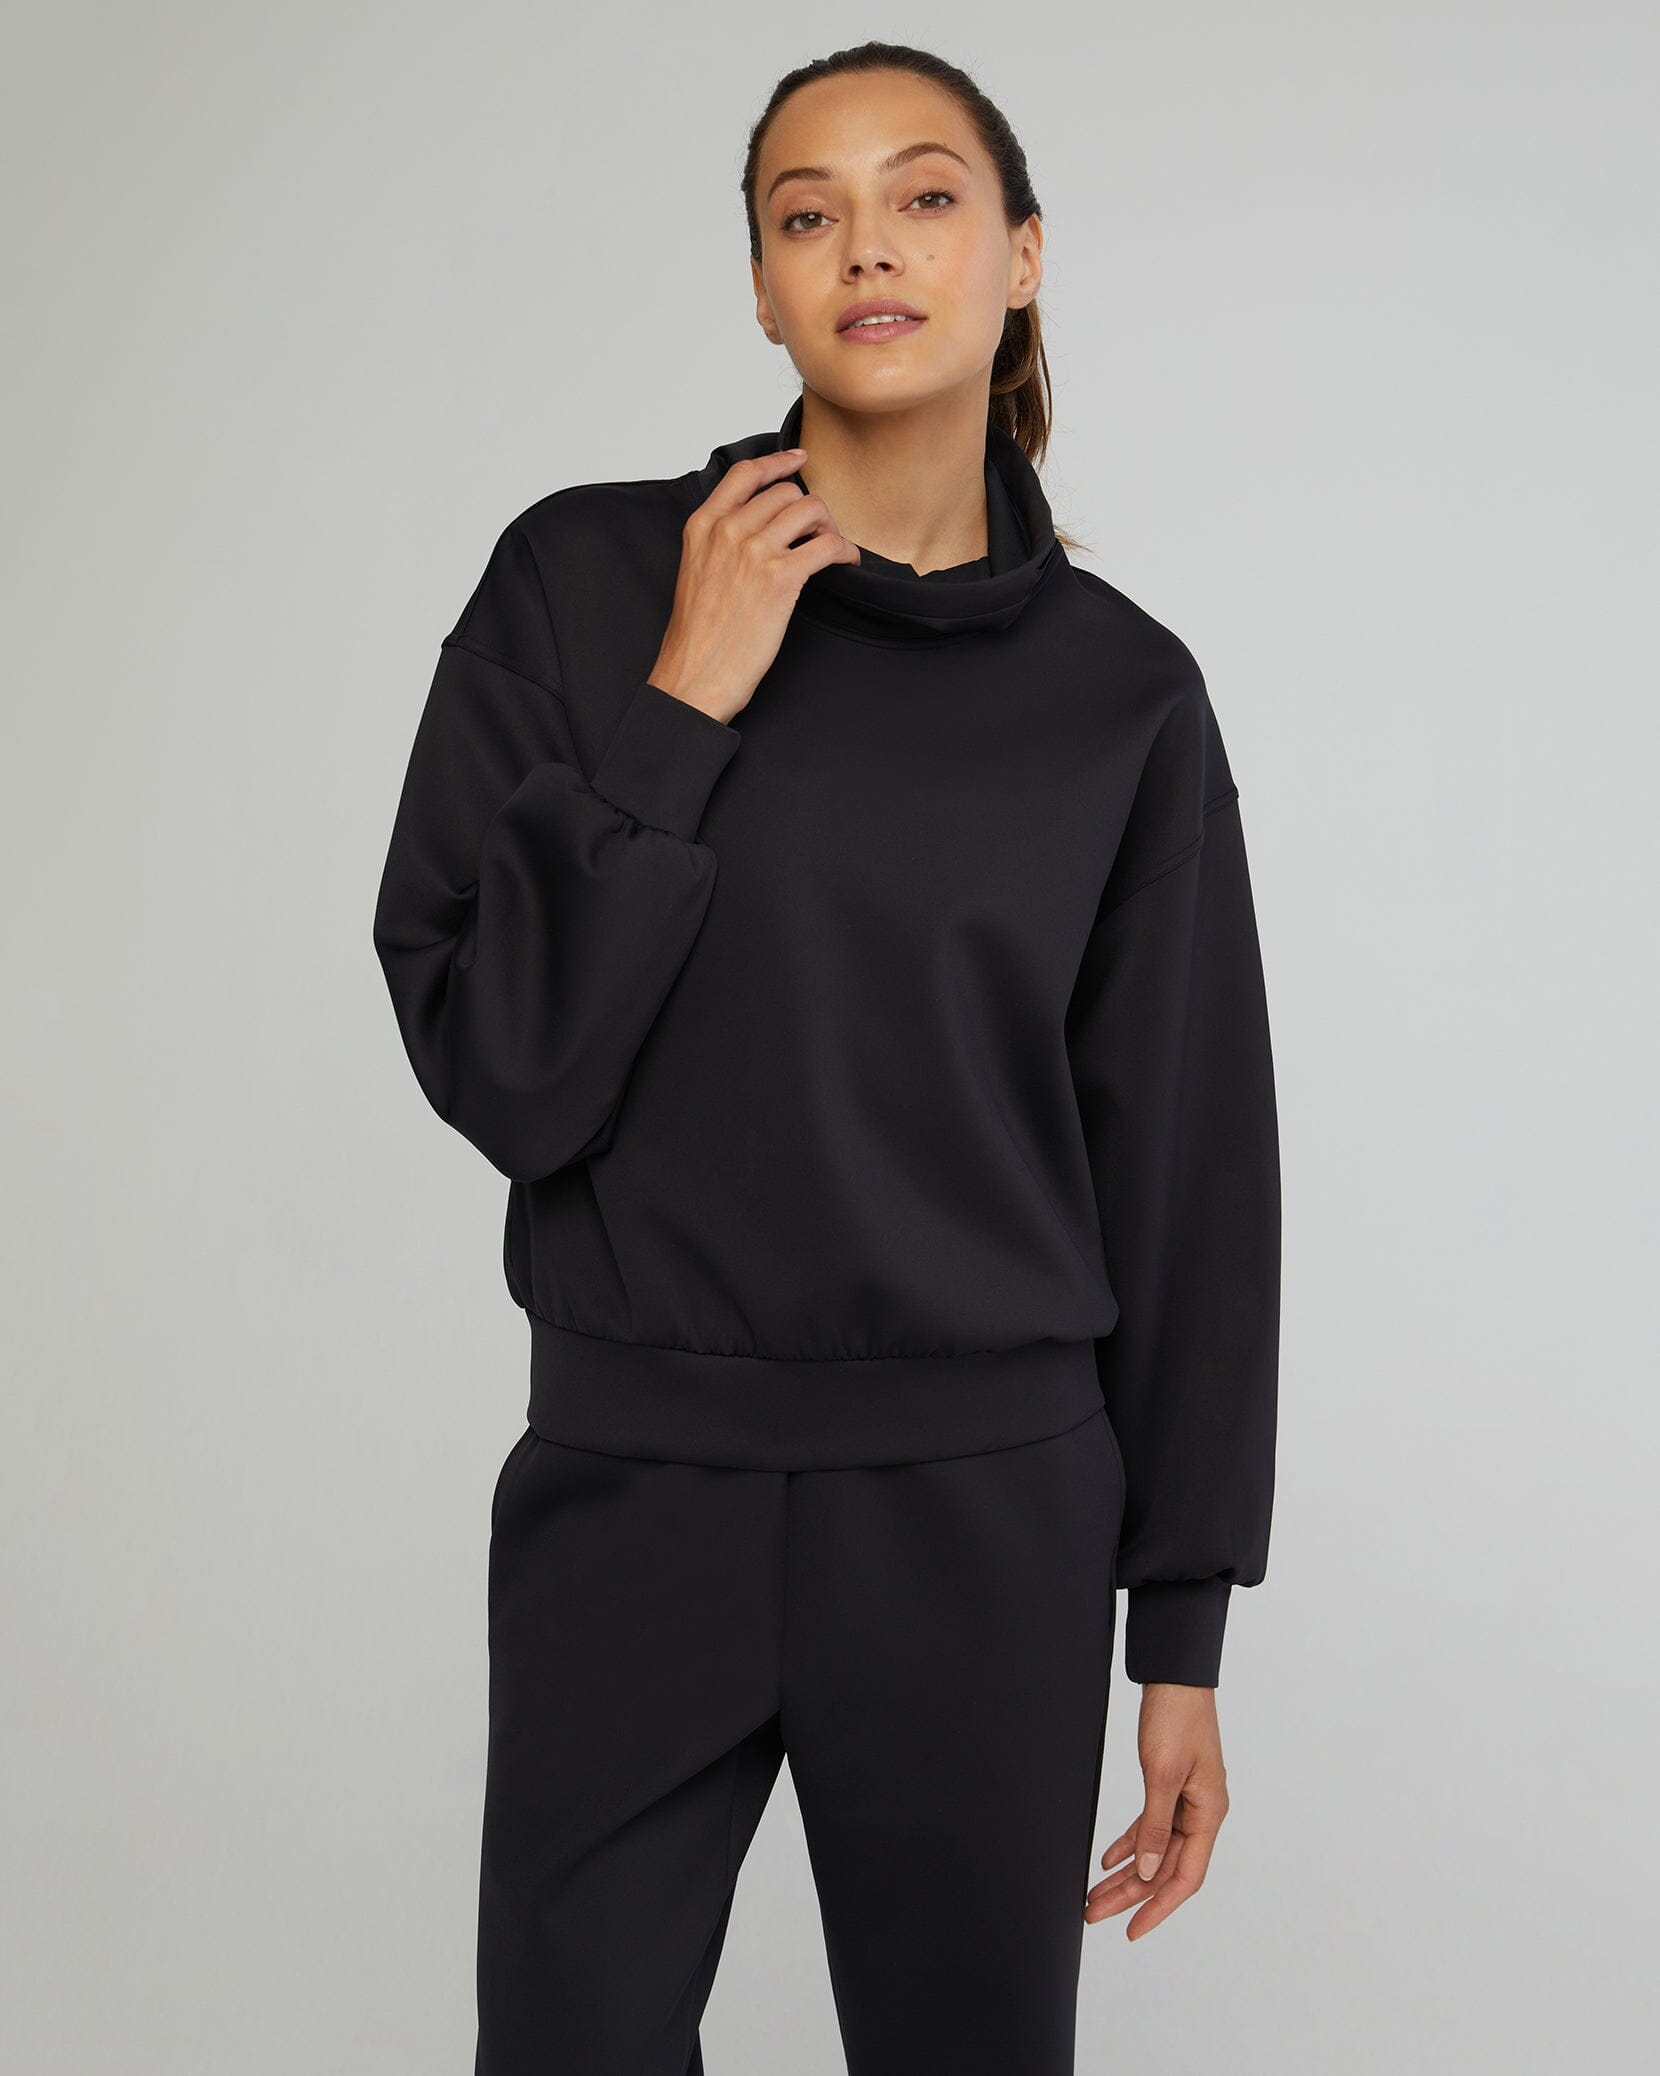 Cowl Top – IVL Collective